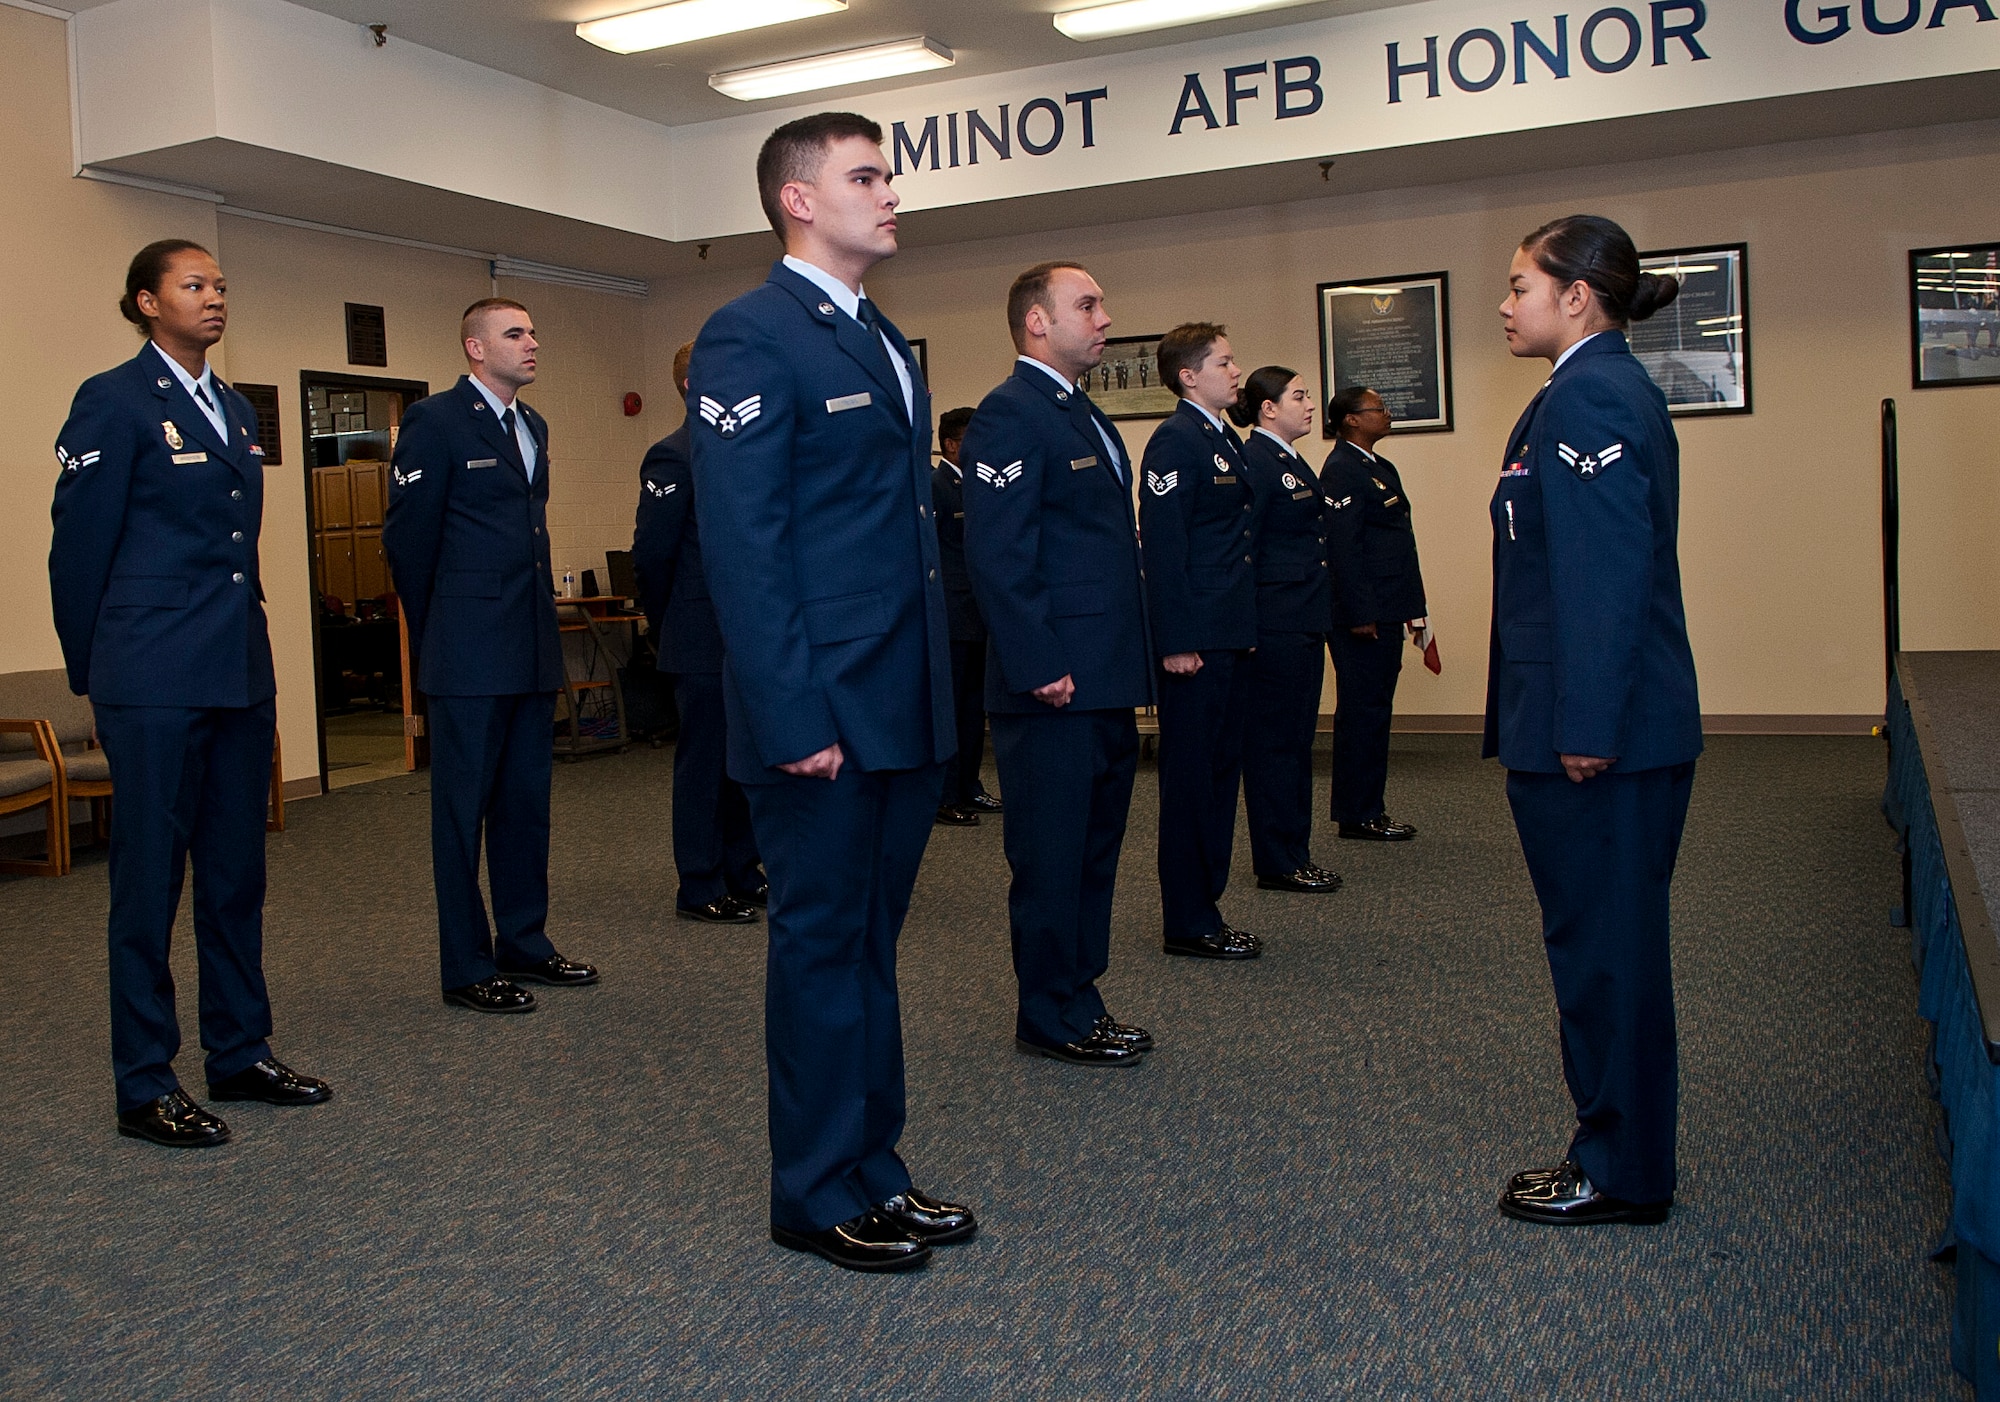 Airmen with the Minot Air Force Base Honor Guard perform an open ranks inspection at Minot Air Force Base, N.D., Sept. 29, 2016. Open ranks is performed in the Airmen’s service dress uniform in order to help them understand the dress and appearance standards of the ceremonial guardsmen, which must be upheld at all times. (U.S. Air Force photo/Airman 1st Class Jonathan McElderry)